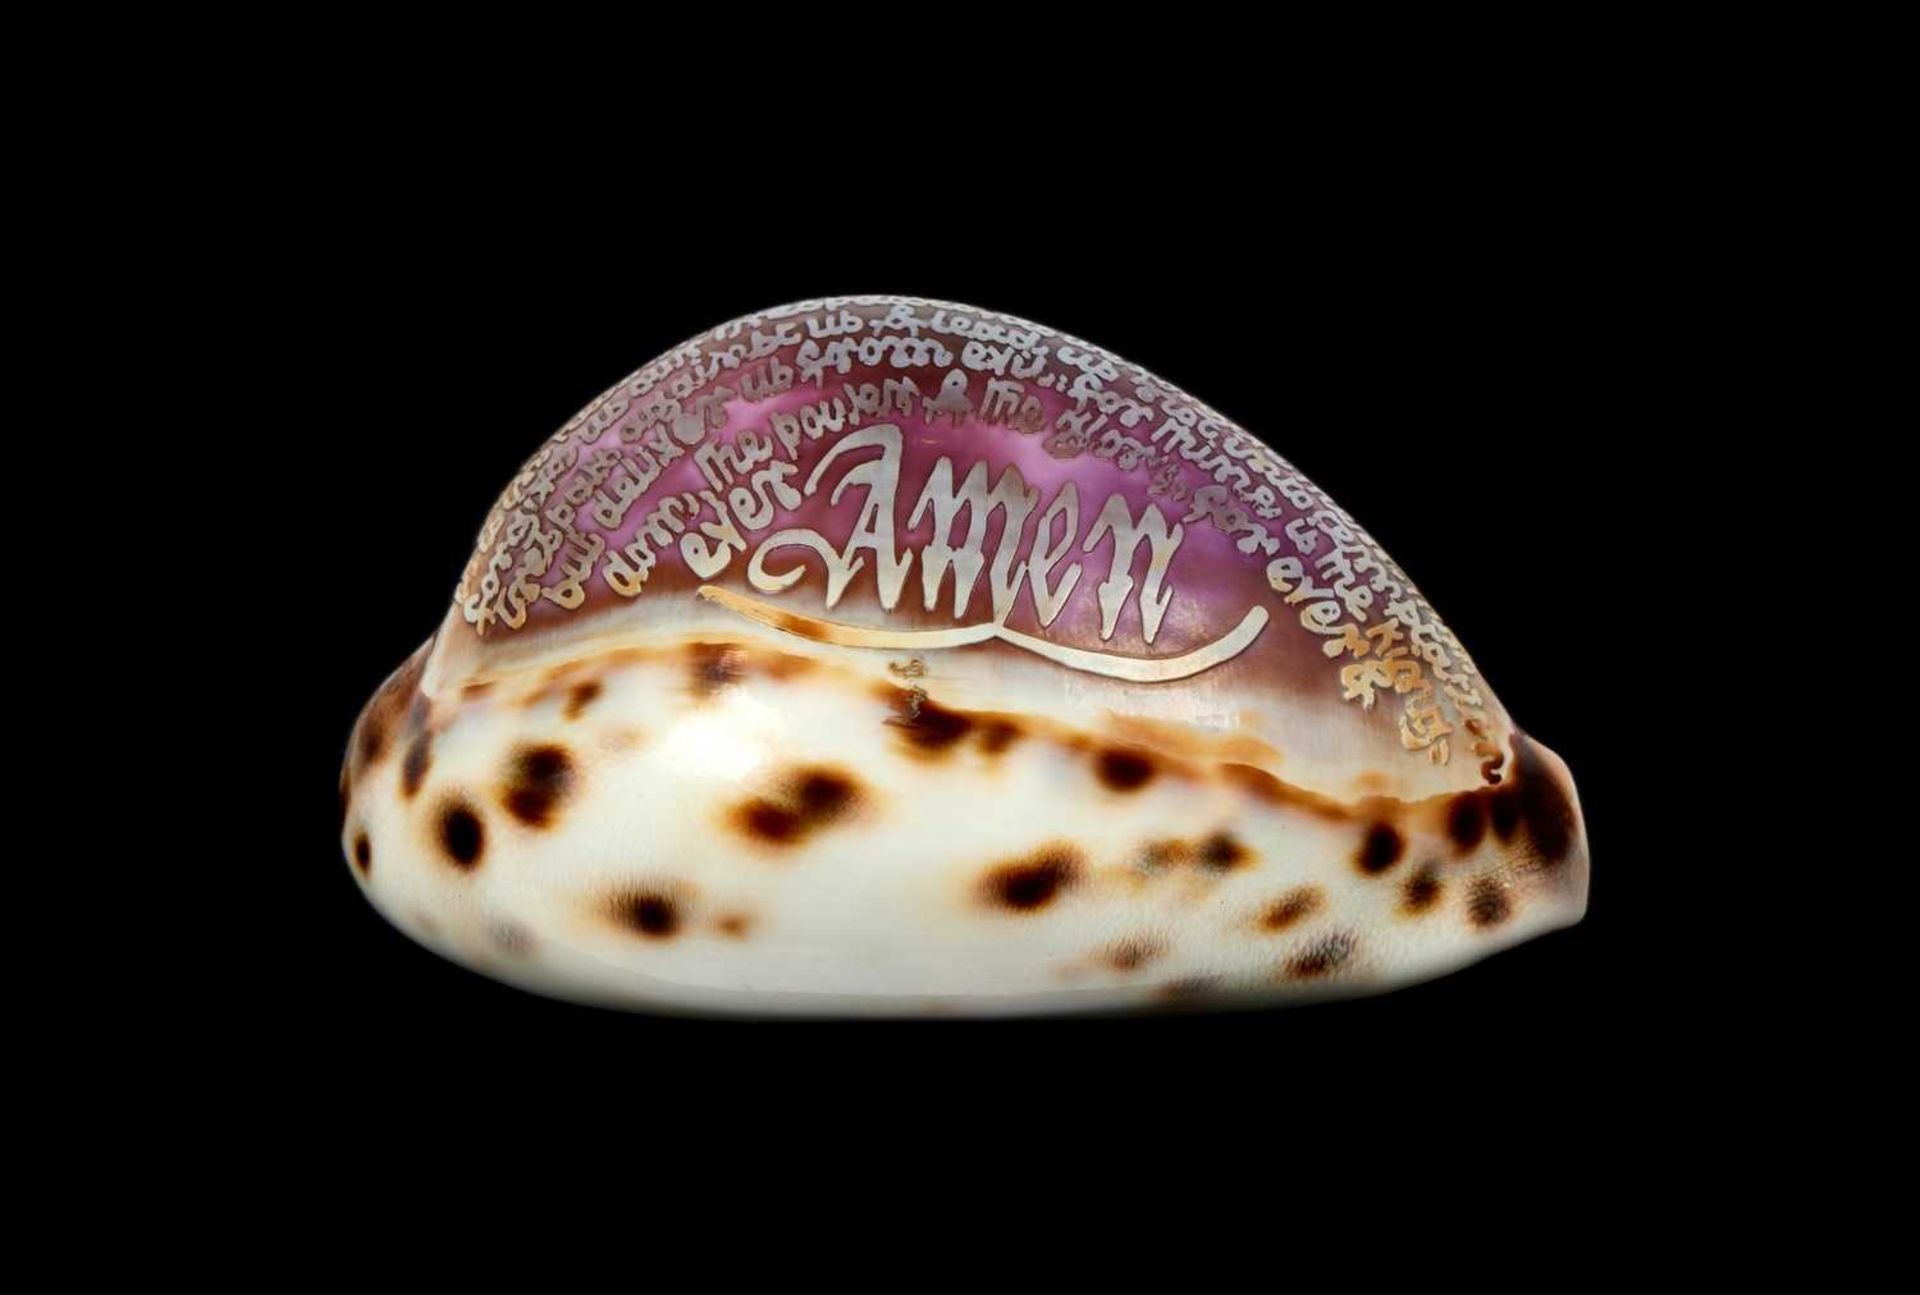 VICTORIAN CURIOSITY: A TIGER COWRIE SHELLCARVED WITH THE LORD’S PRAYER